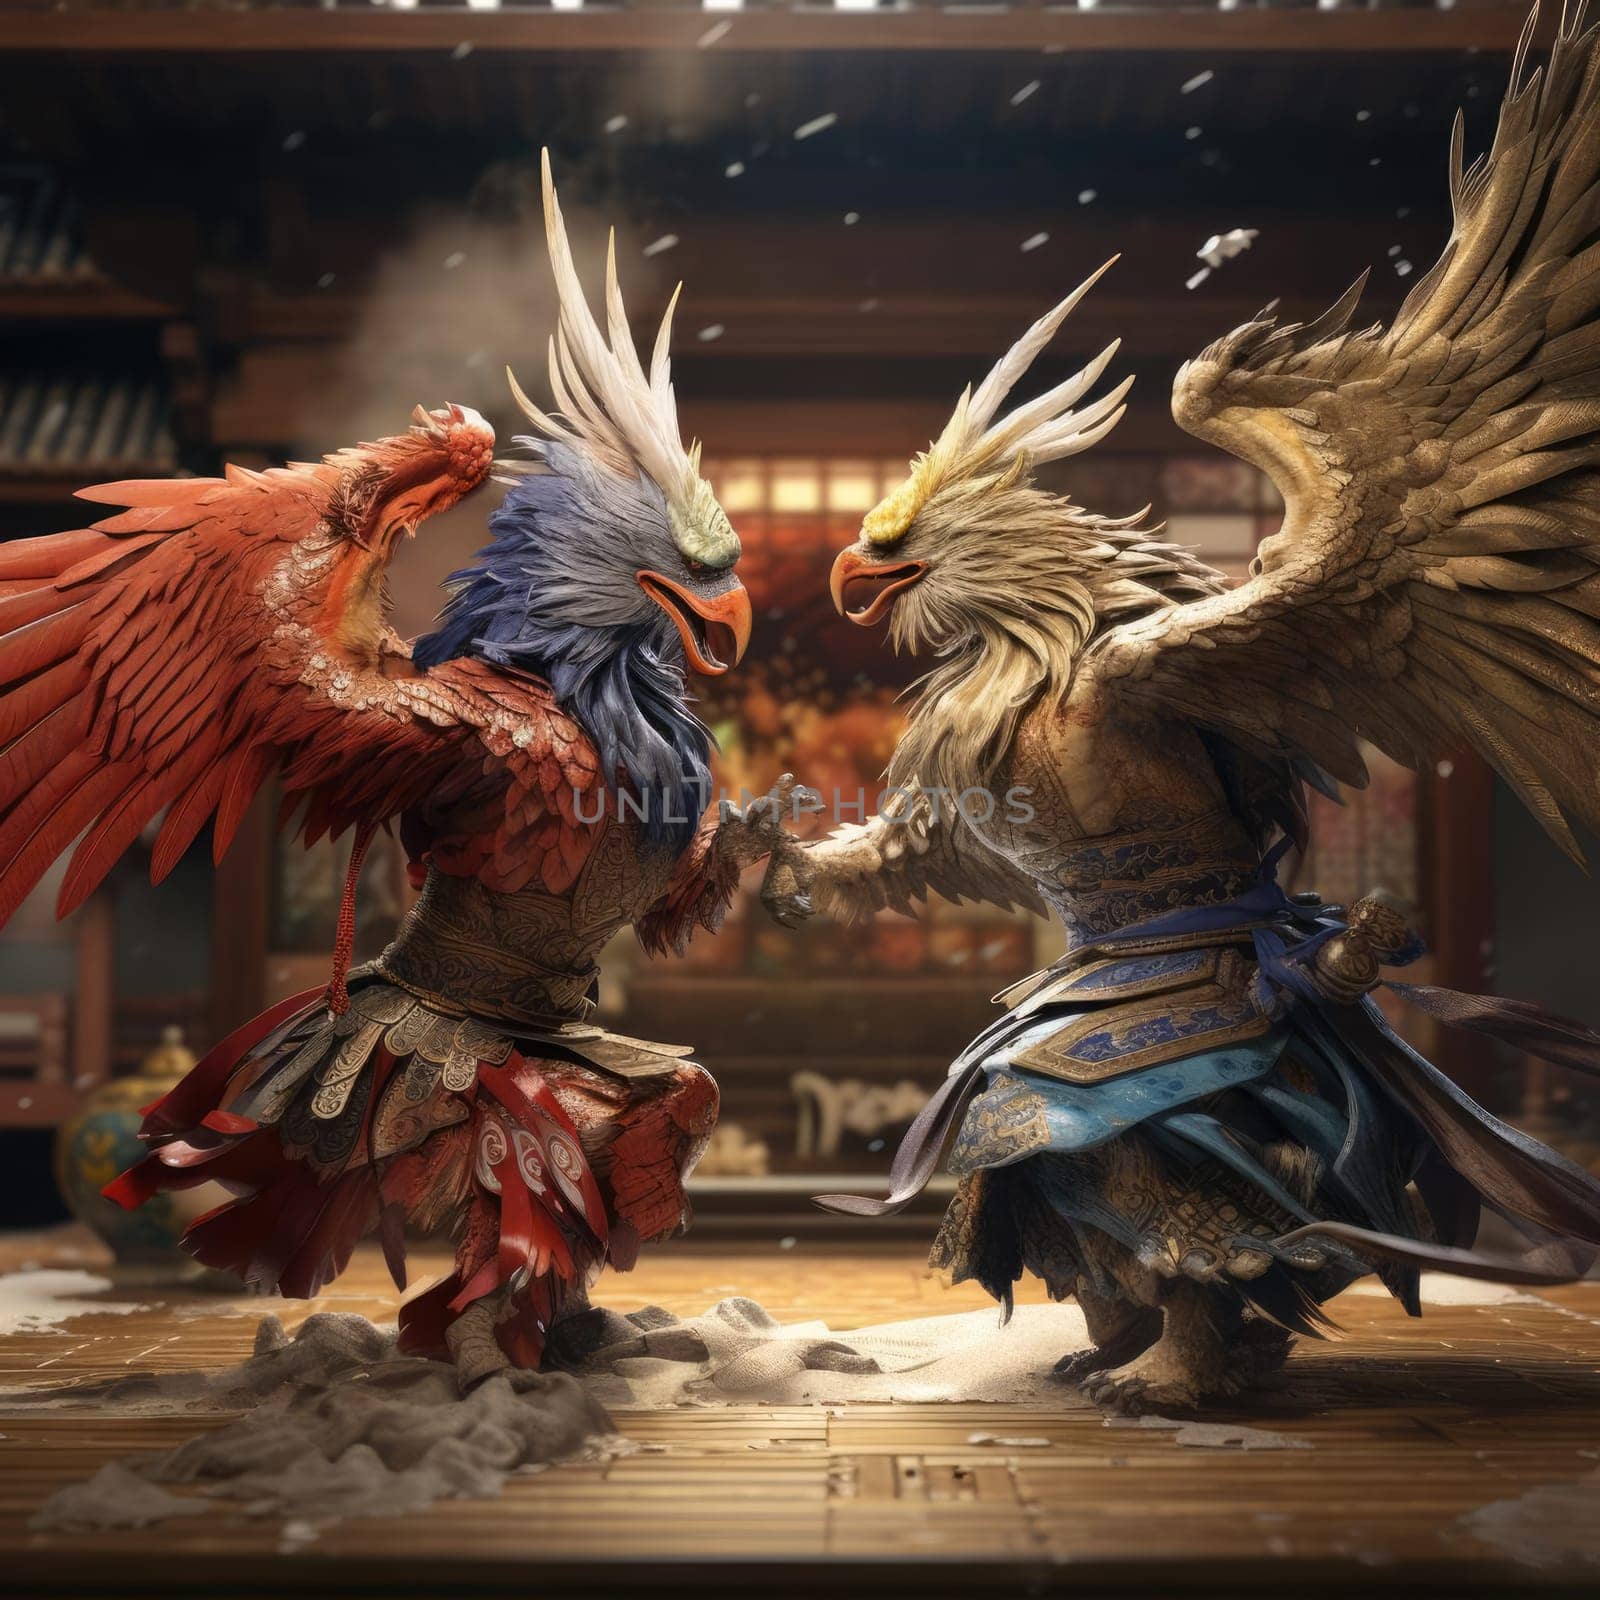 Two eagles fight each other on the tatami